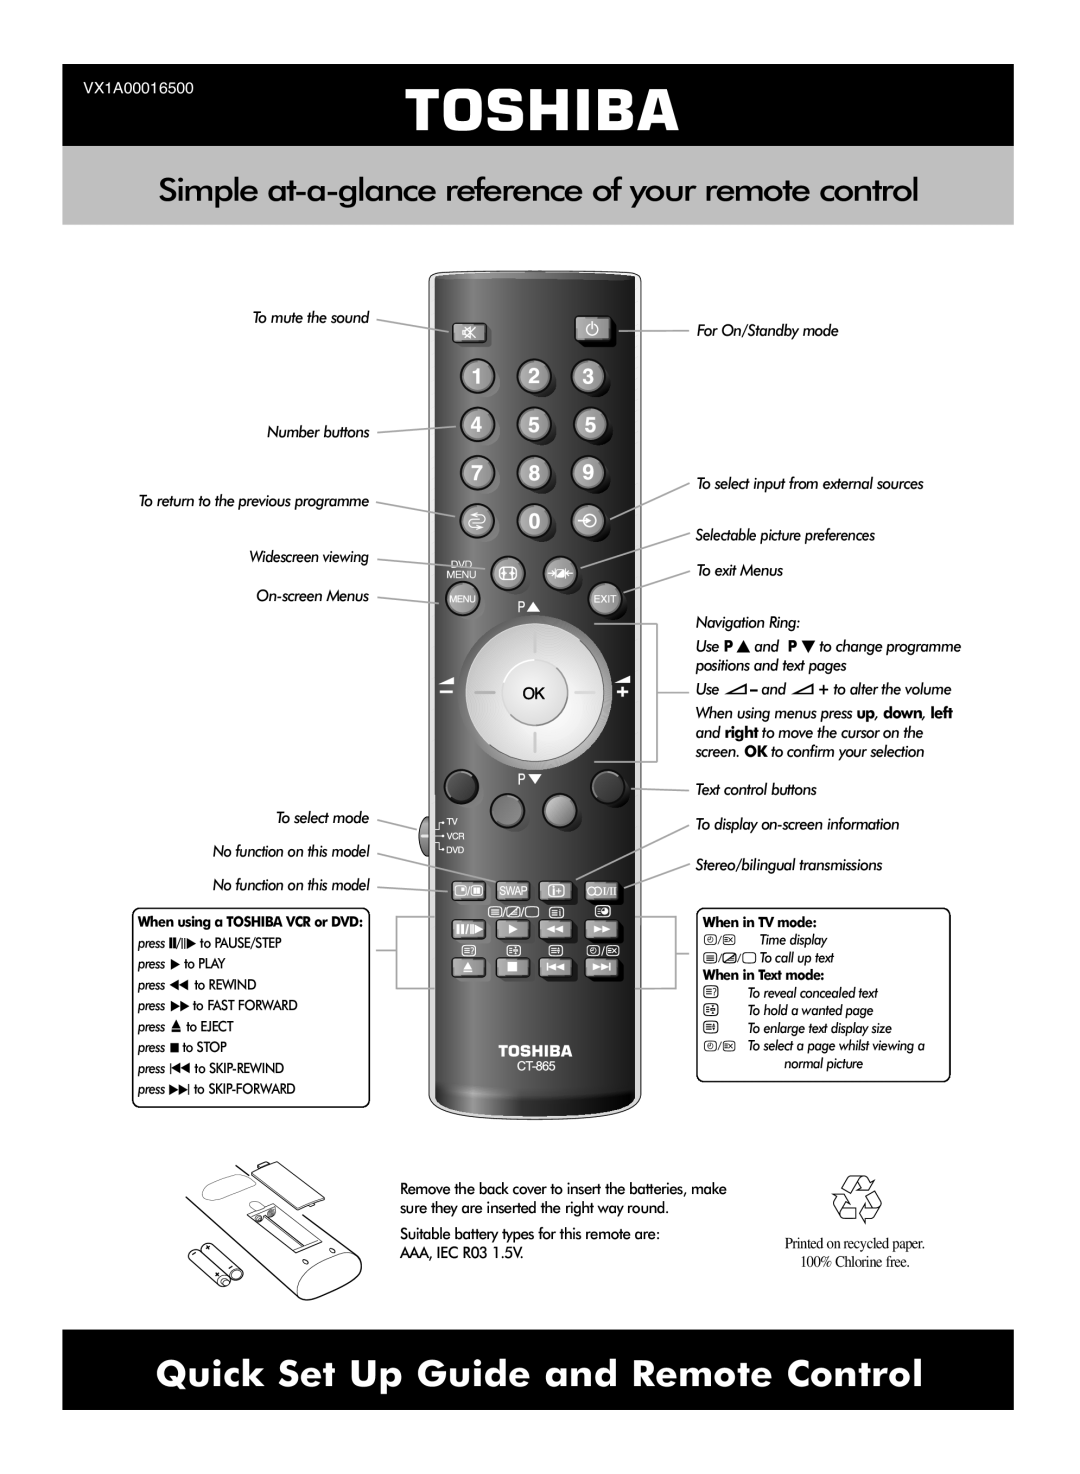 Toshiba VX1A00016500 setup guide Toshiba, Quick Set Up Guide and Remote Control, When using a TOSHIBA VCR or DVD 